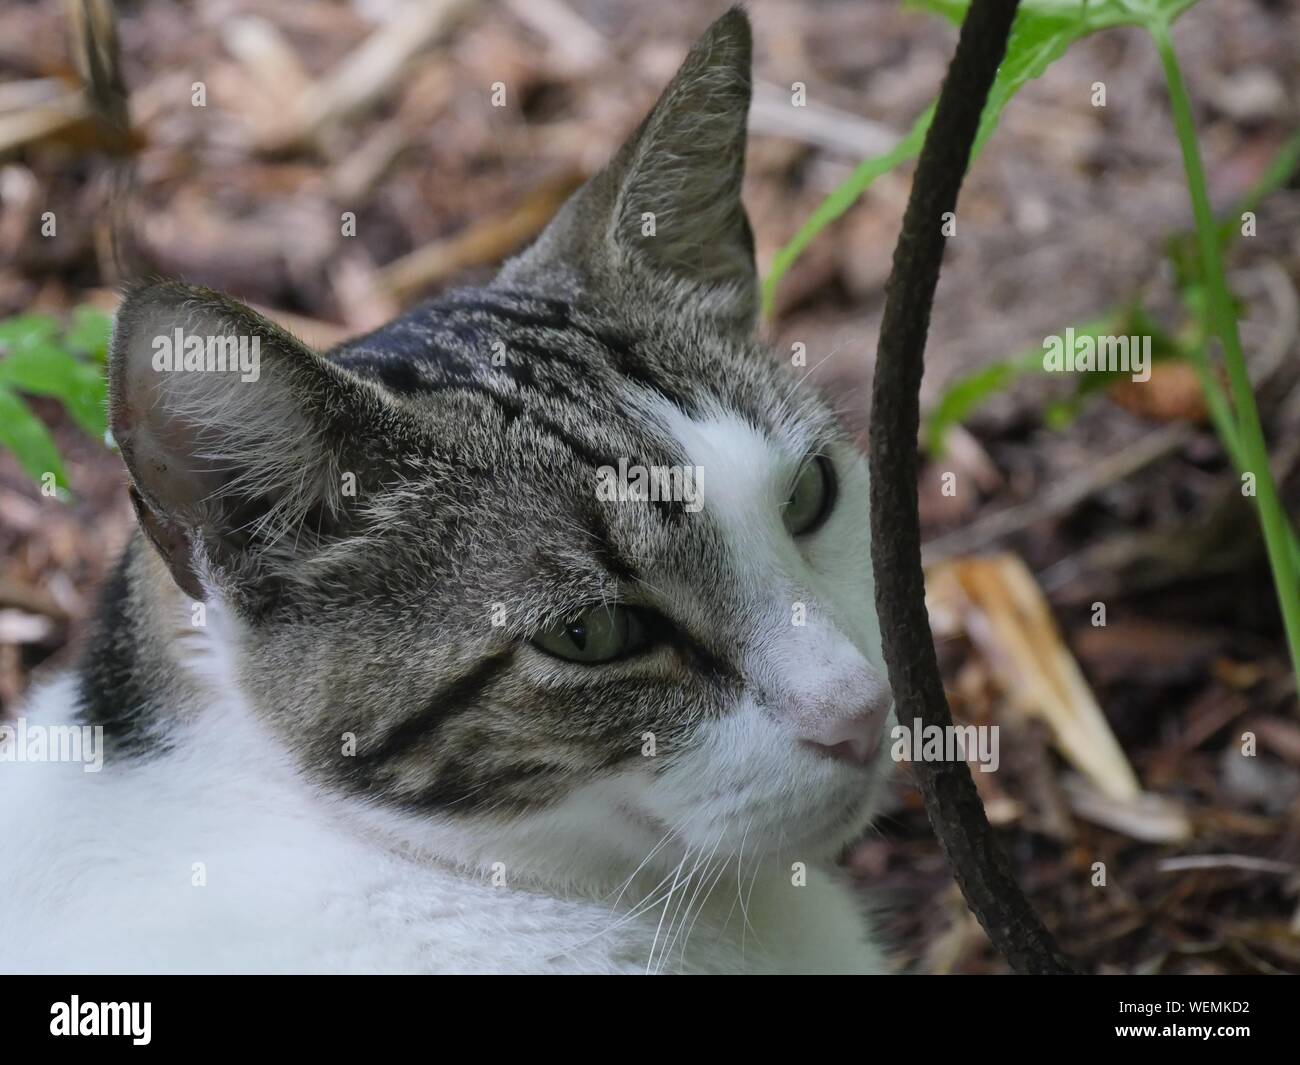 Head shot of a cute cat relaxing at the Hemingway gardens in Key West, Florida. Stock Photo